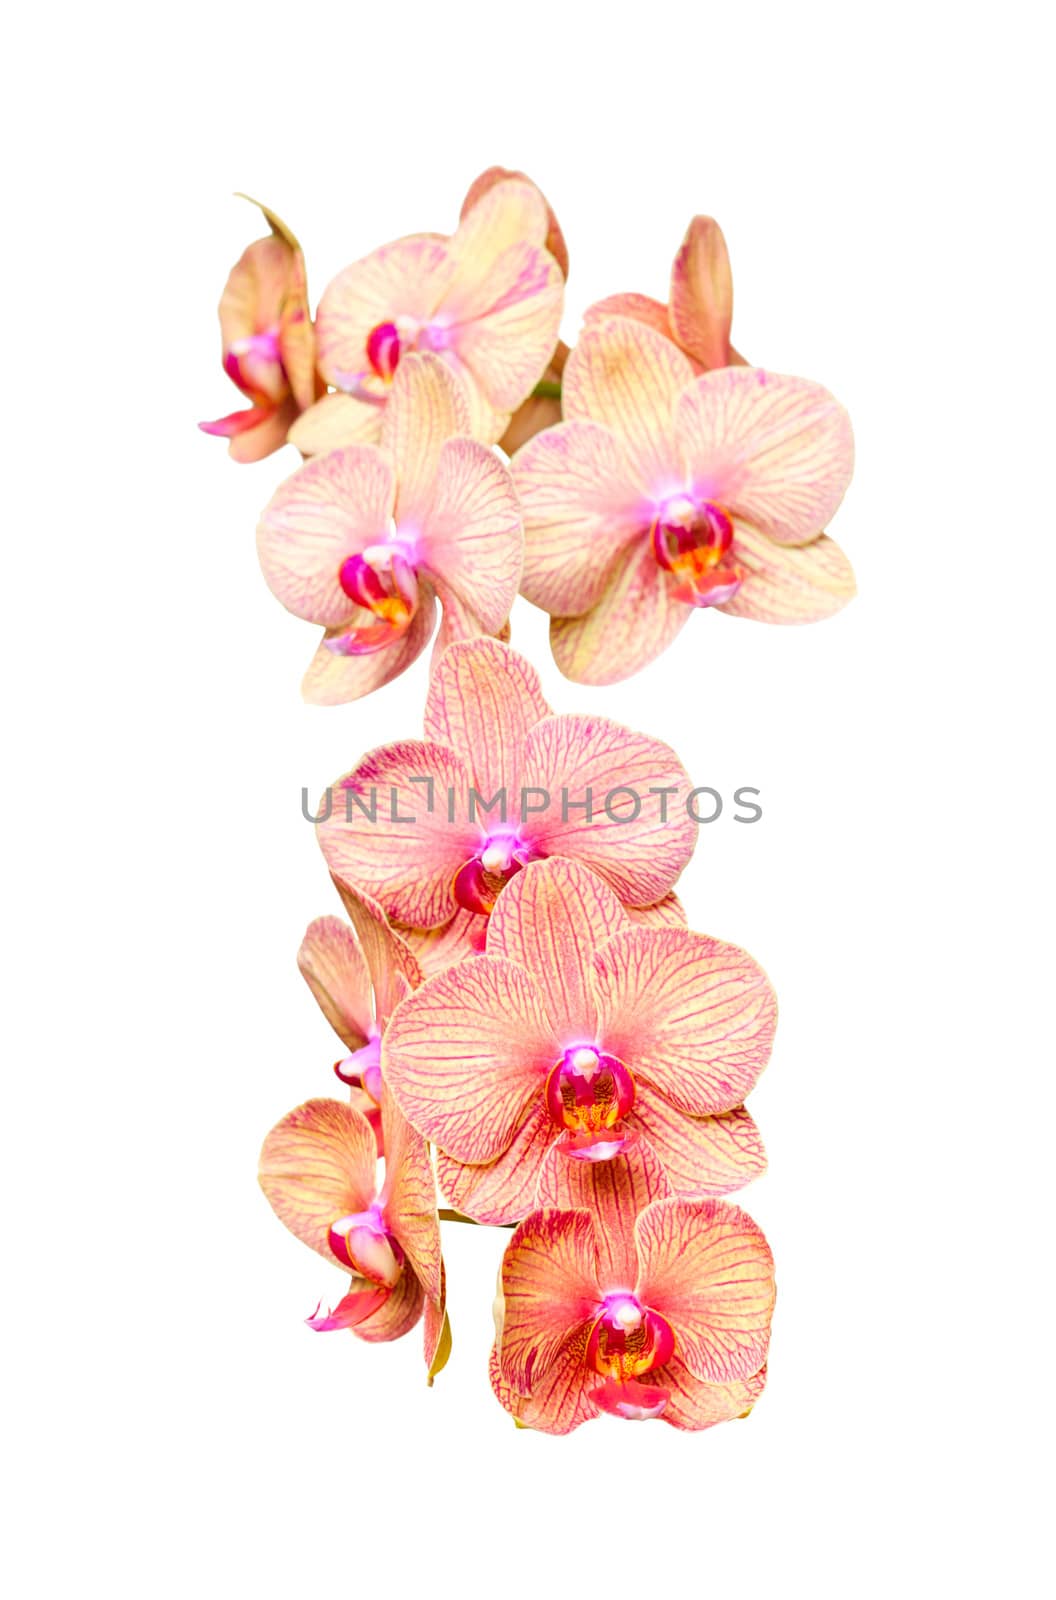 Big colorful orchids flowers bunch isolated on white